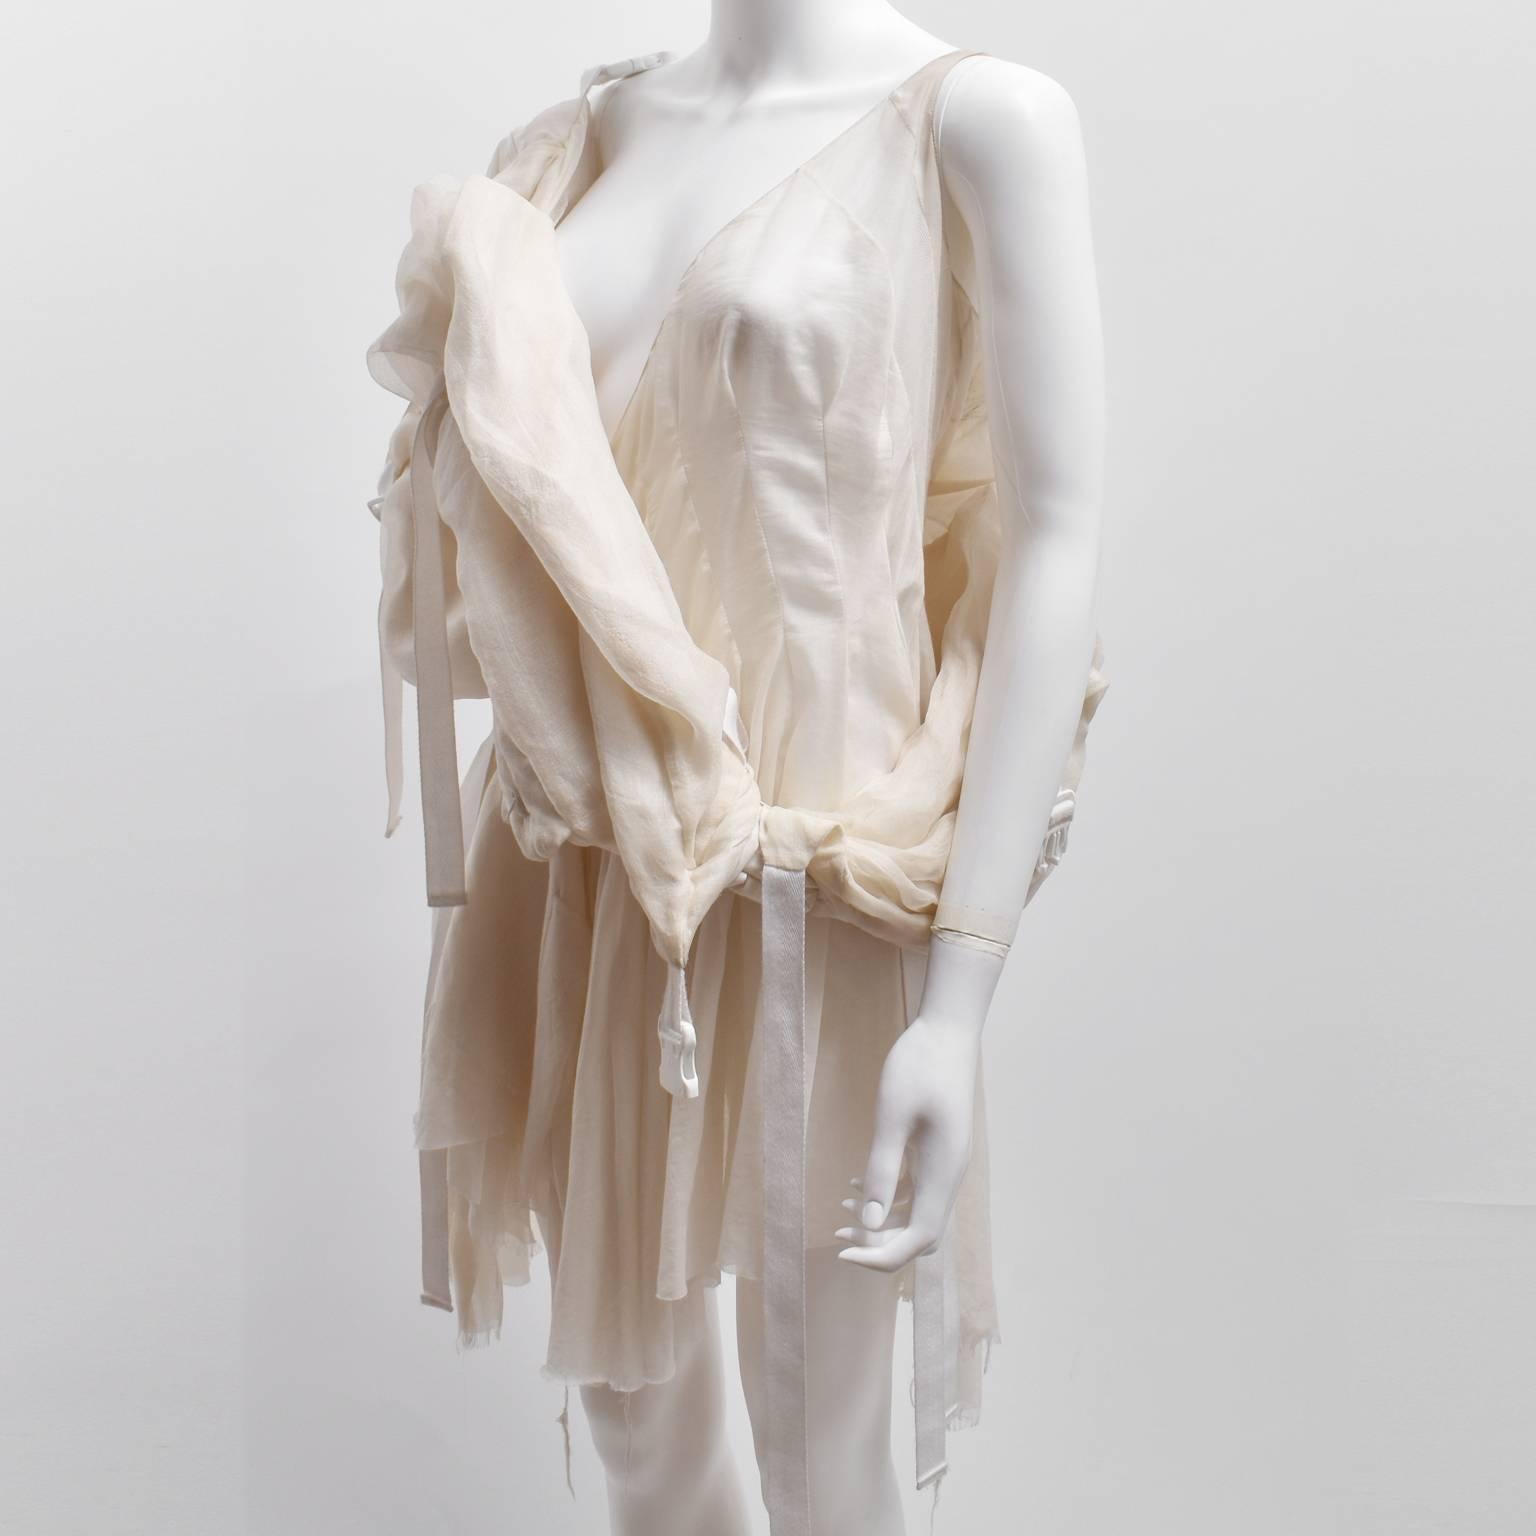 A beautiful and rare dress from Meadham Kirchoff’s Spring Summer 2010 runway collection. This is the dress that was worn on the runway and so features a label from the press agency. The dress is inspired by parachutes with padded, three dimensional